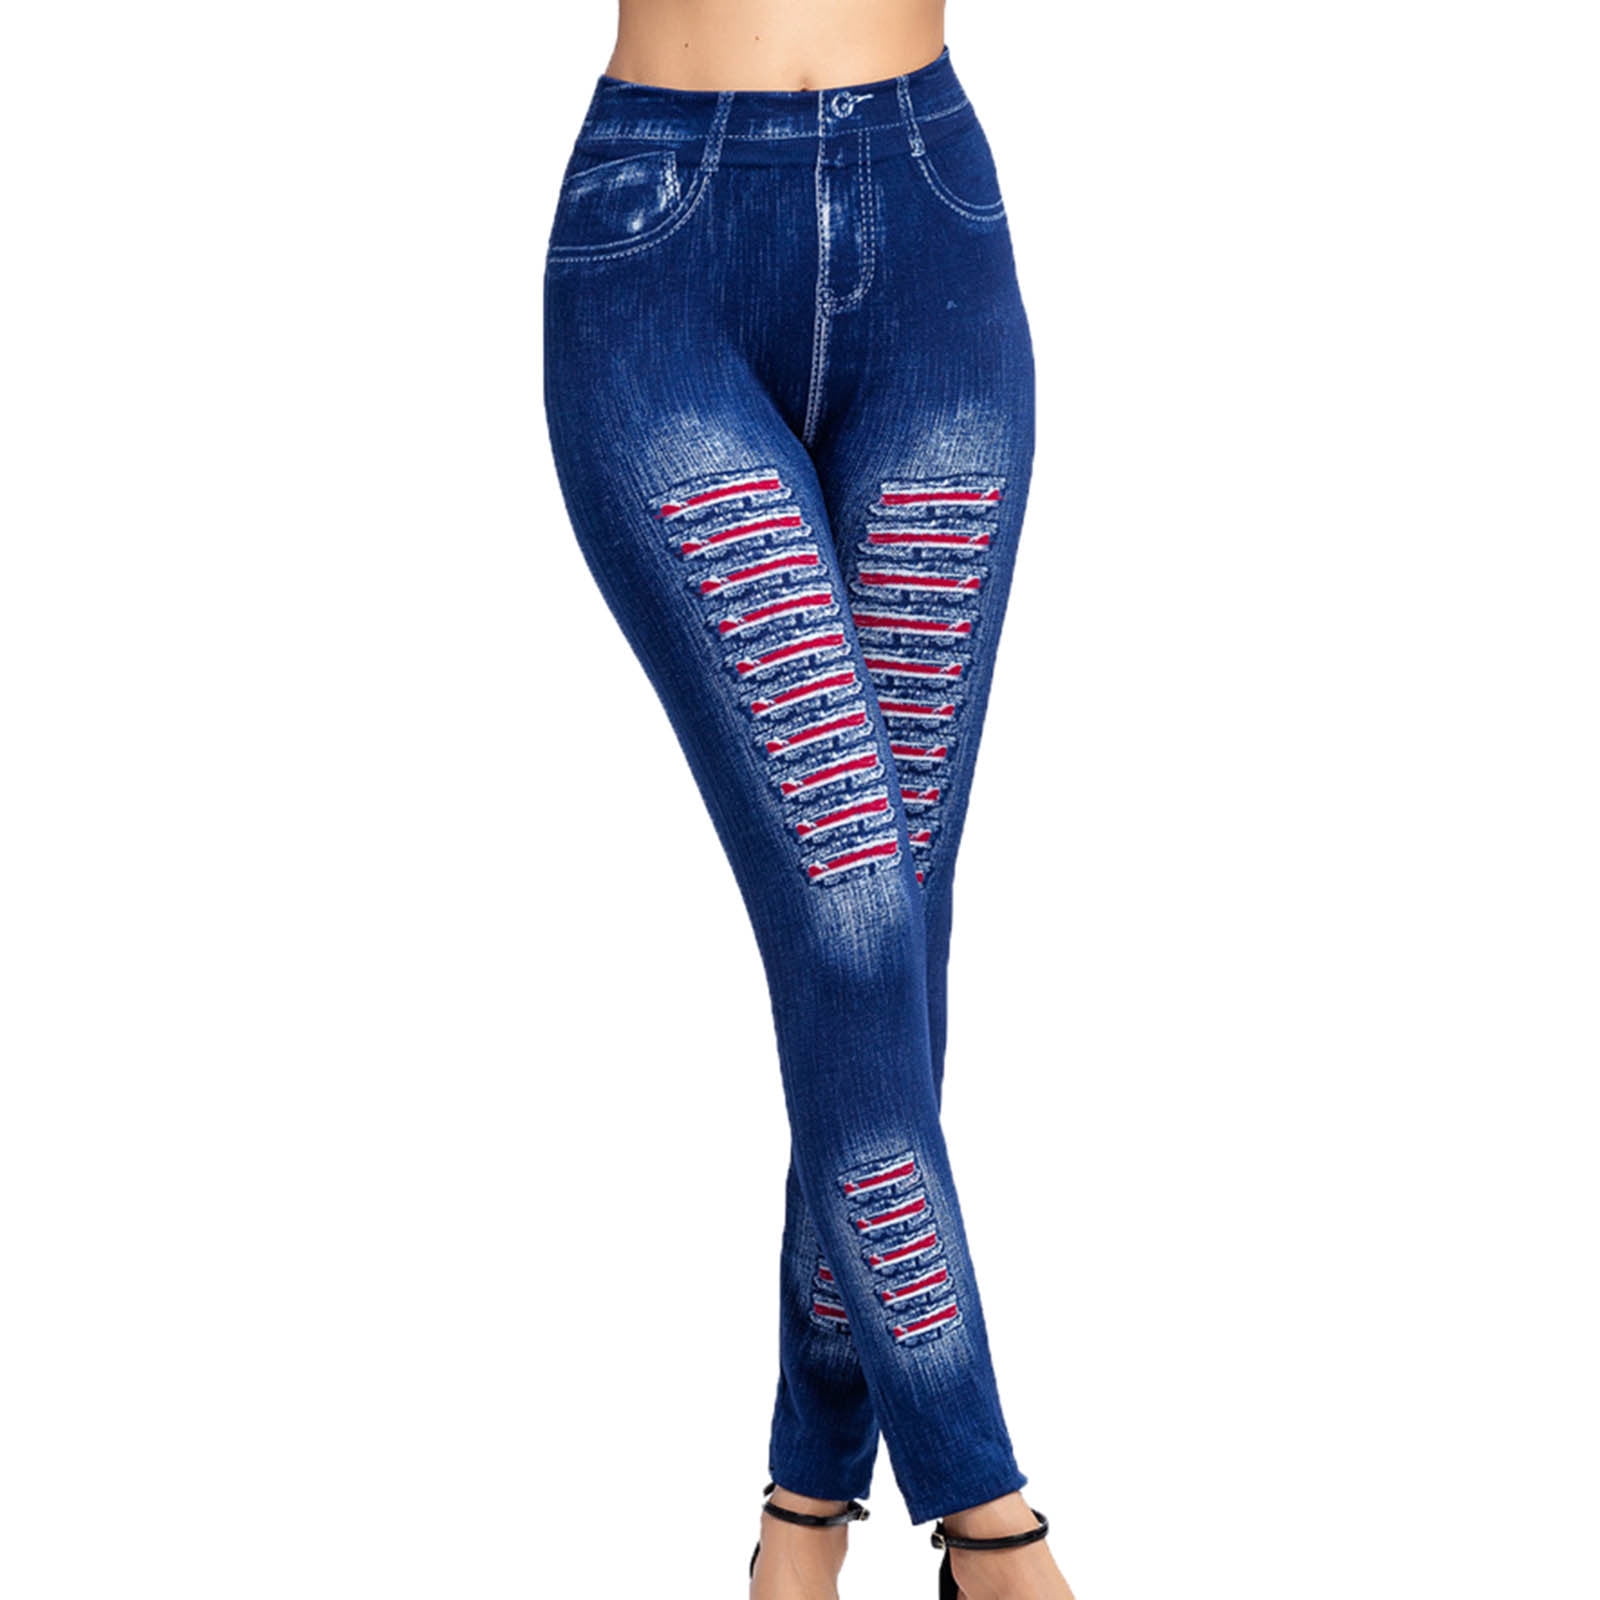 Imitation Jeans Leggings High Waist Scratched Slim-fitting Faux